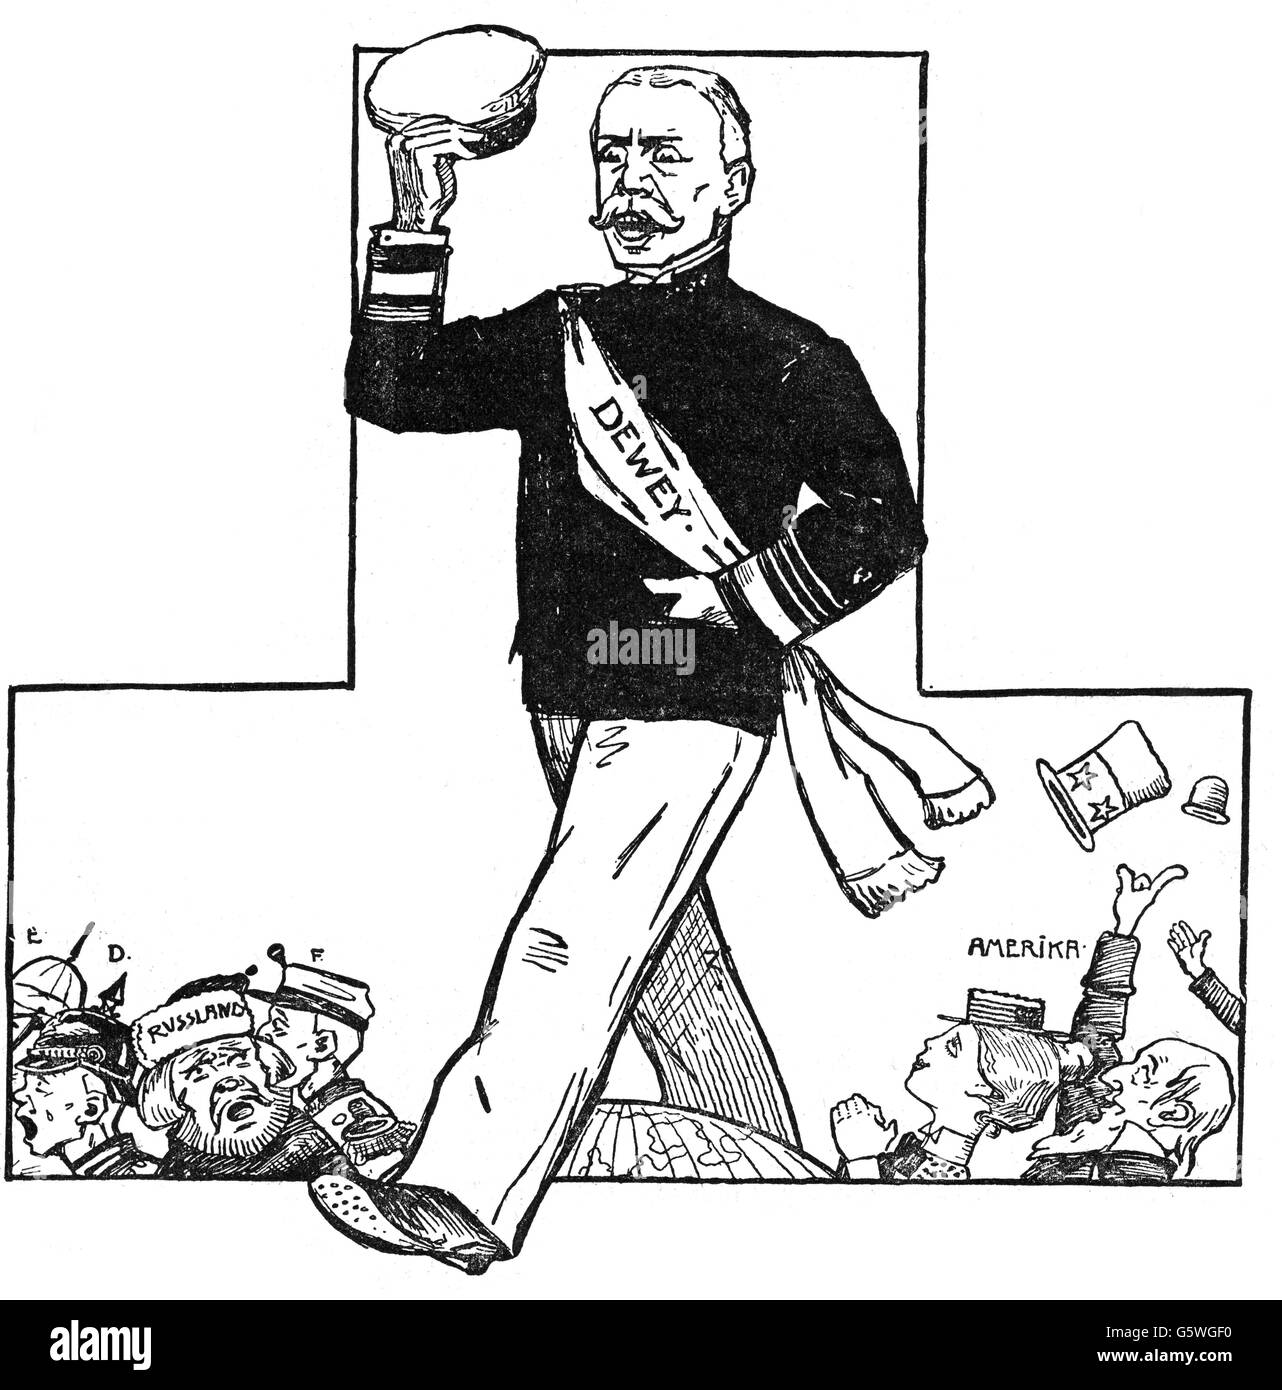 Spanish-American War 1898, caricature, admiral George Dewey, "The coming Great Man", drawing, "Die Woche", Berlin, 1898, Additional-Rights-Clearences-Not Available Stock Photo